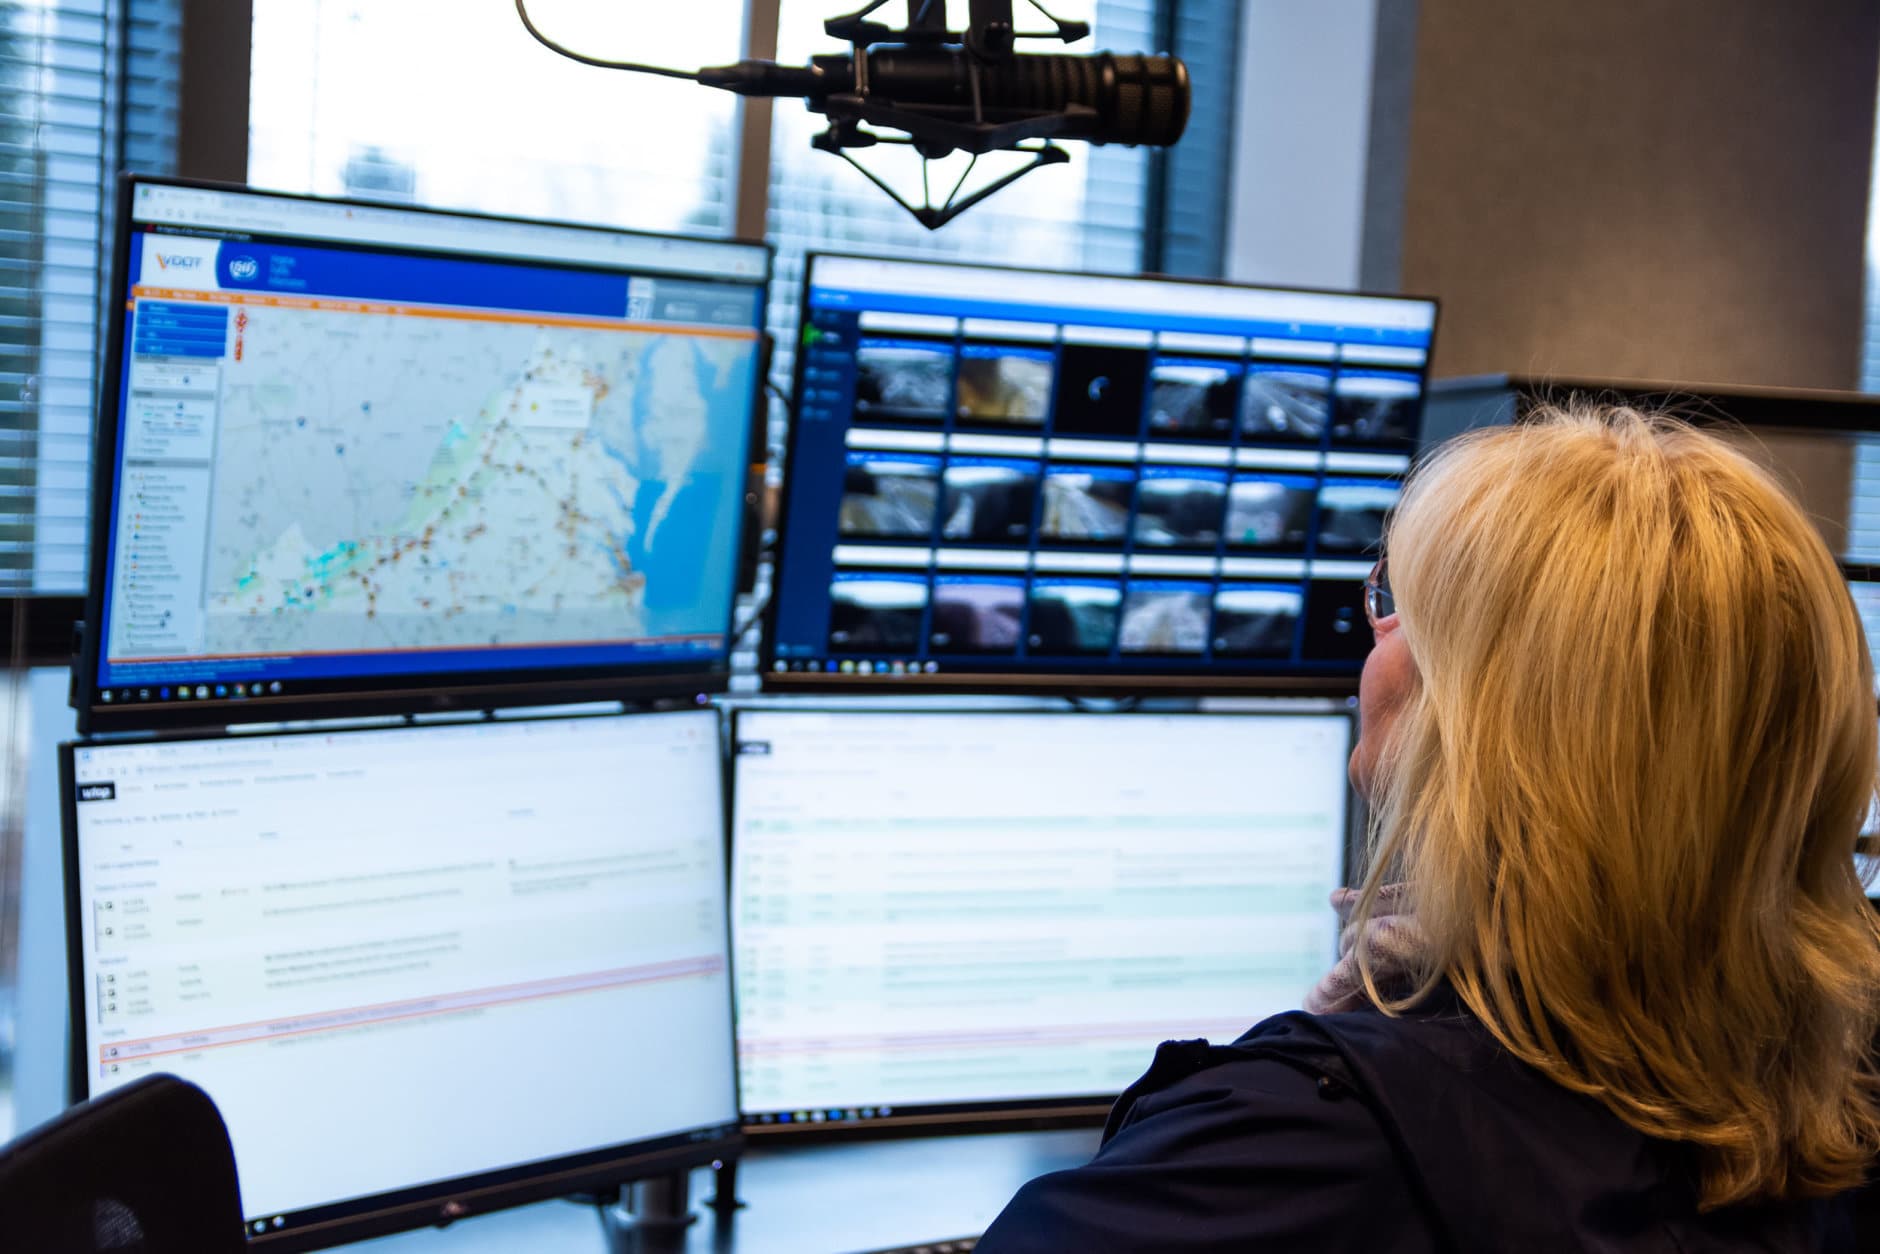 WTOP traffic reporter Mary de Pompa at her work station in the new Traffic Center. With more screens and updated technology, the Traffic Center will be able to monitor more camera and scanner feeds for a wider view of the situation on the roads. (WTOP/Alejandro Alvarez)